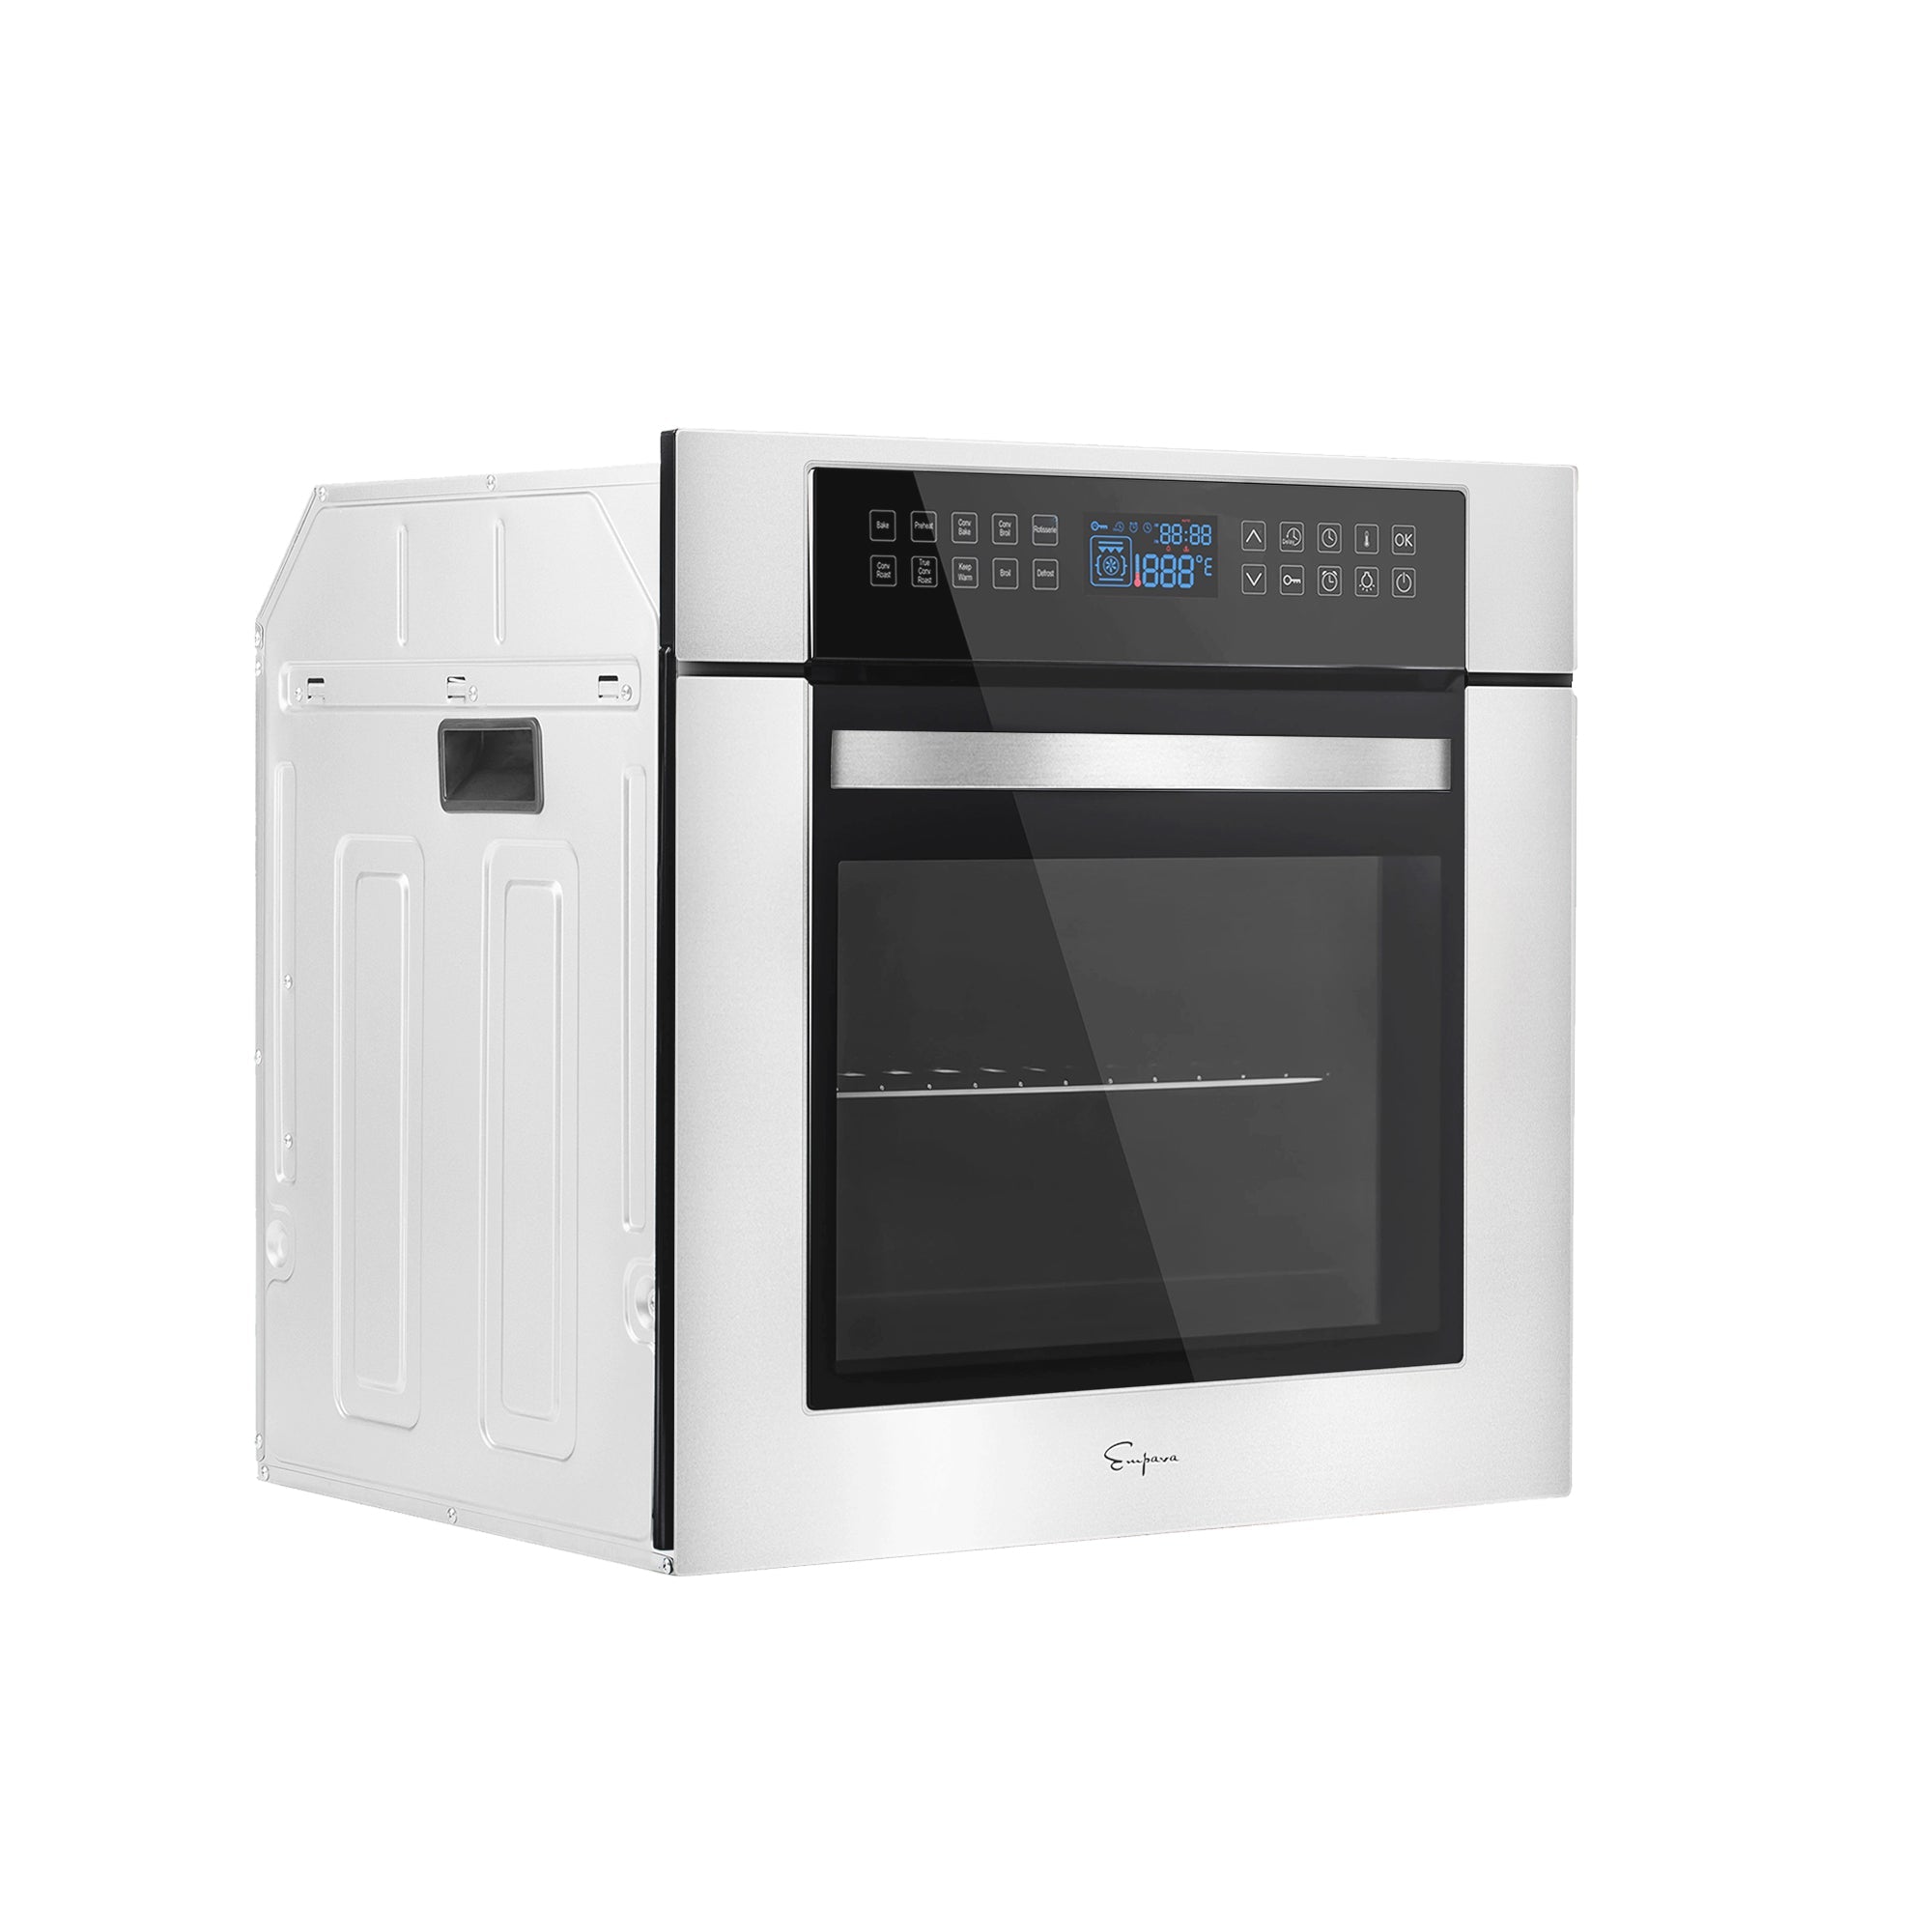 Empava 24WOC02 24 in. Electric Single Wall Oven